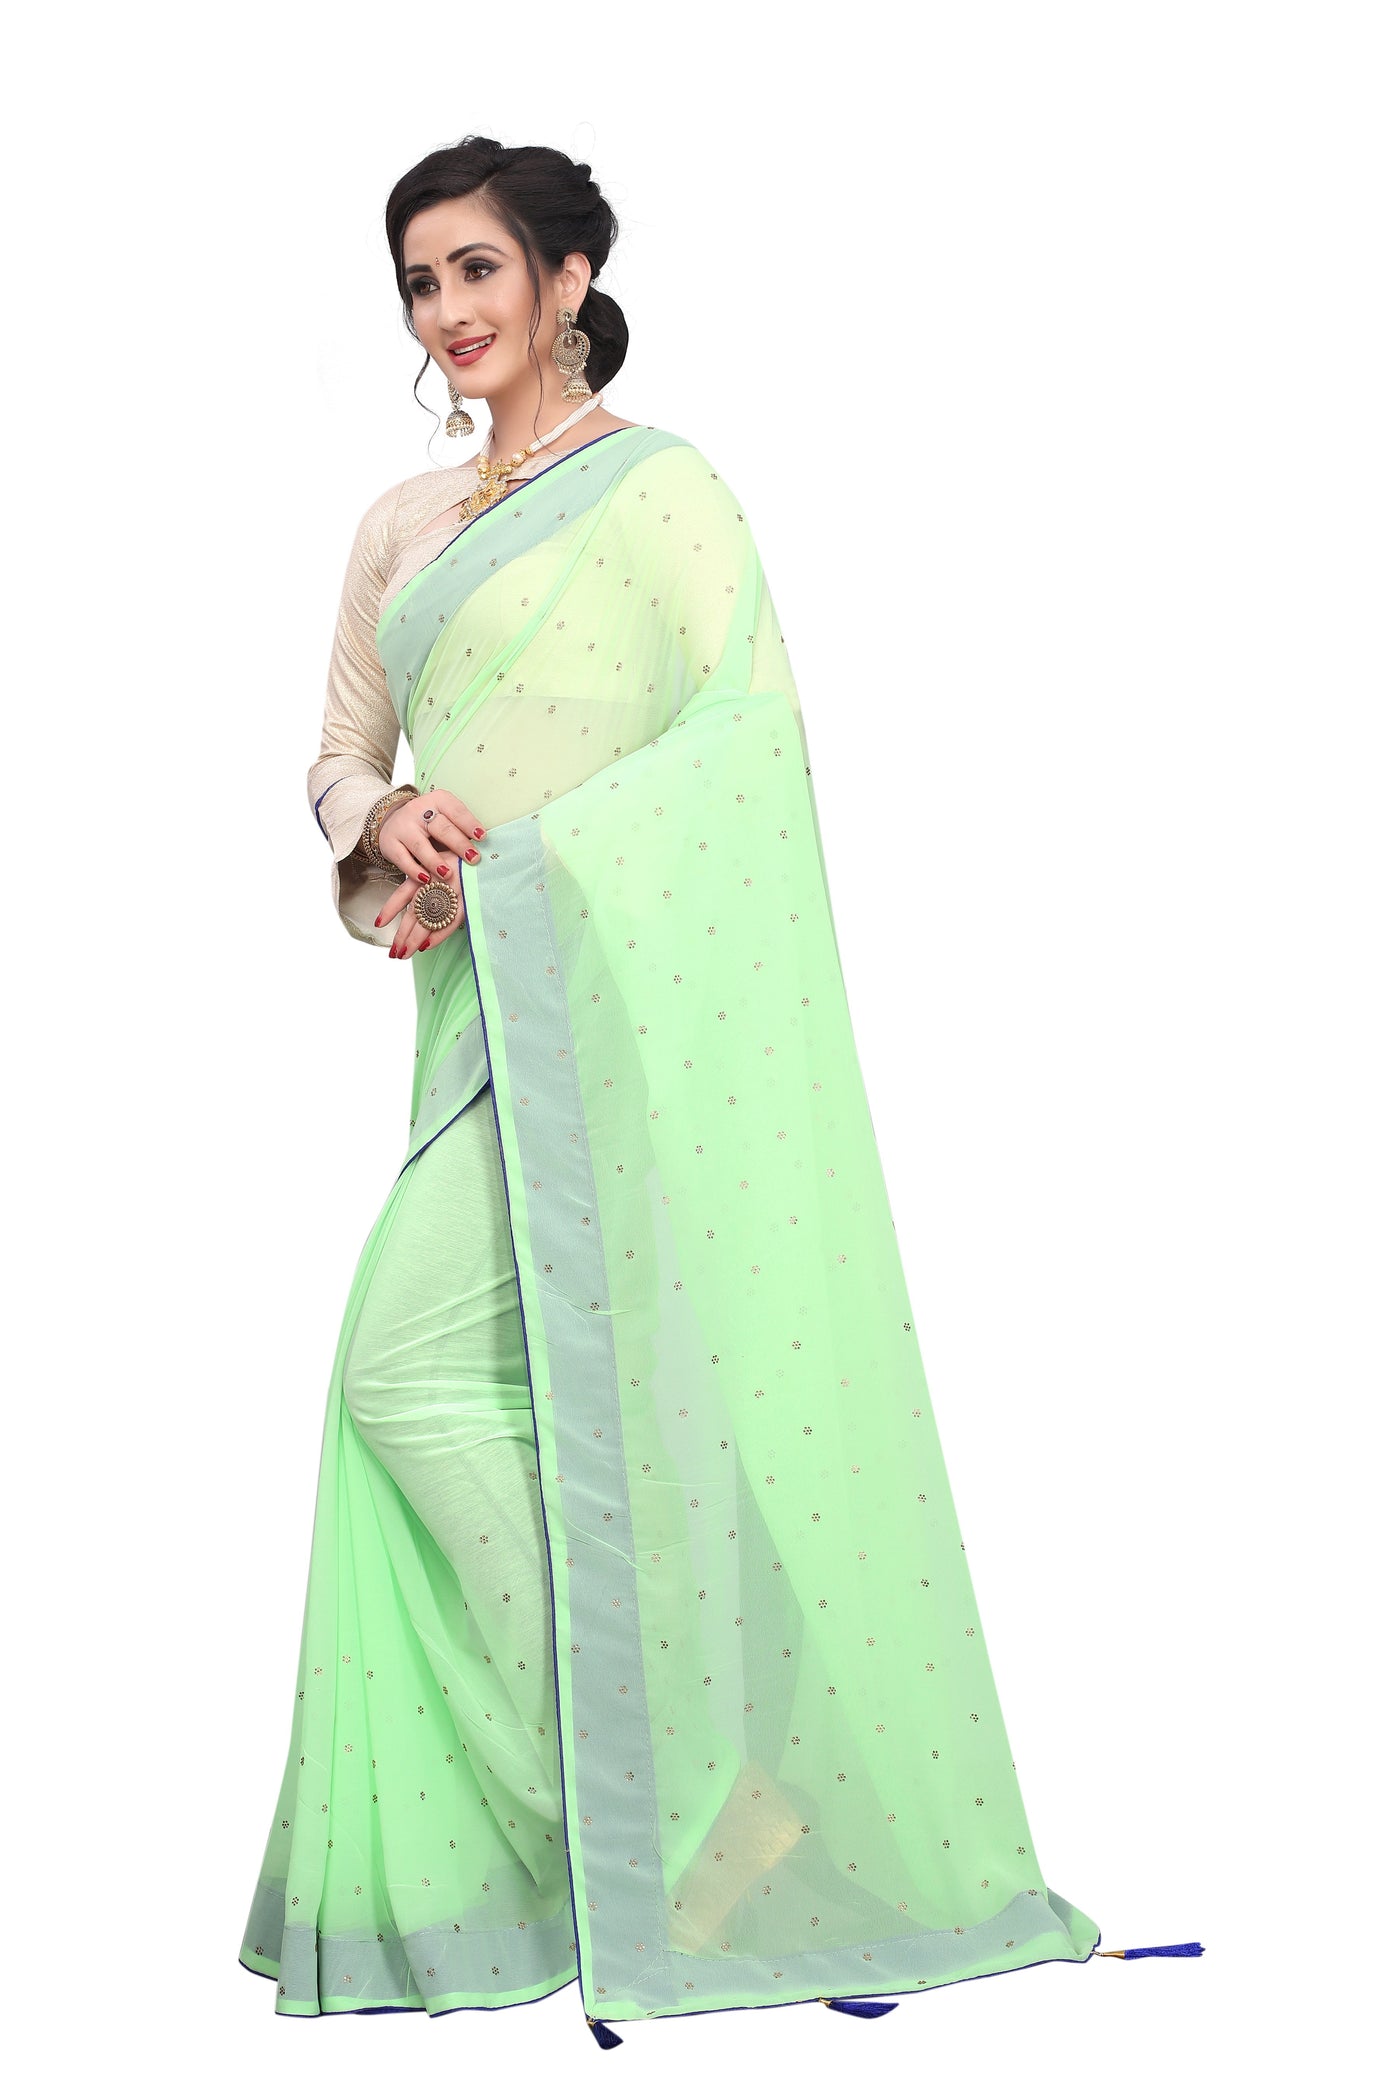 Georgette Satin Green Saree With Blouse